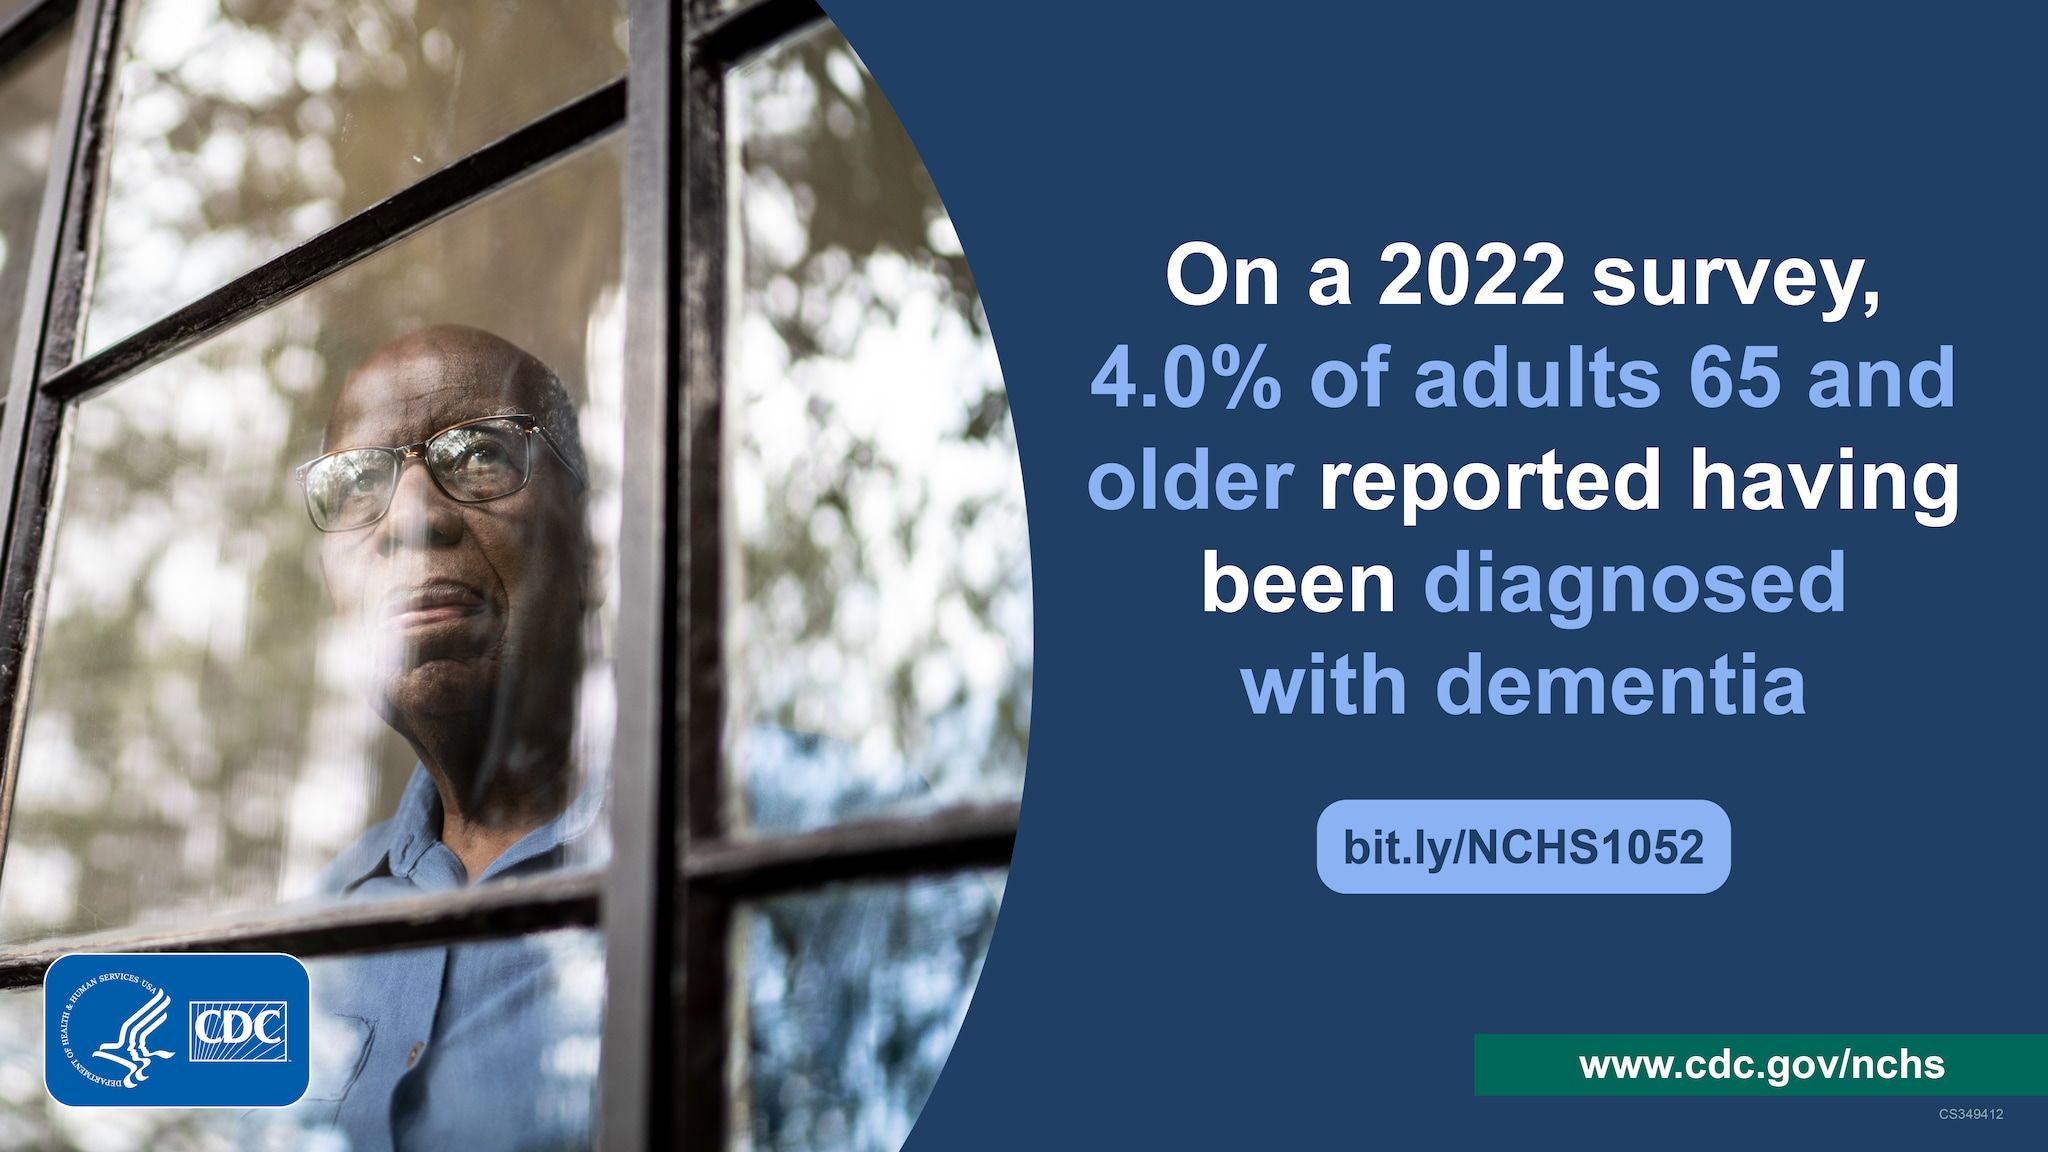 An older man looks out a window. On a 2022 survey, 4.0% of adults 65 and older reported having been diagnosed with dementia.